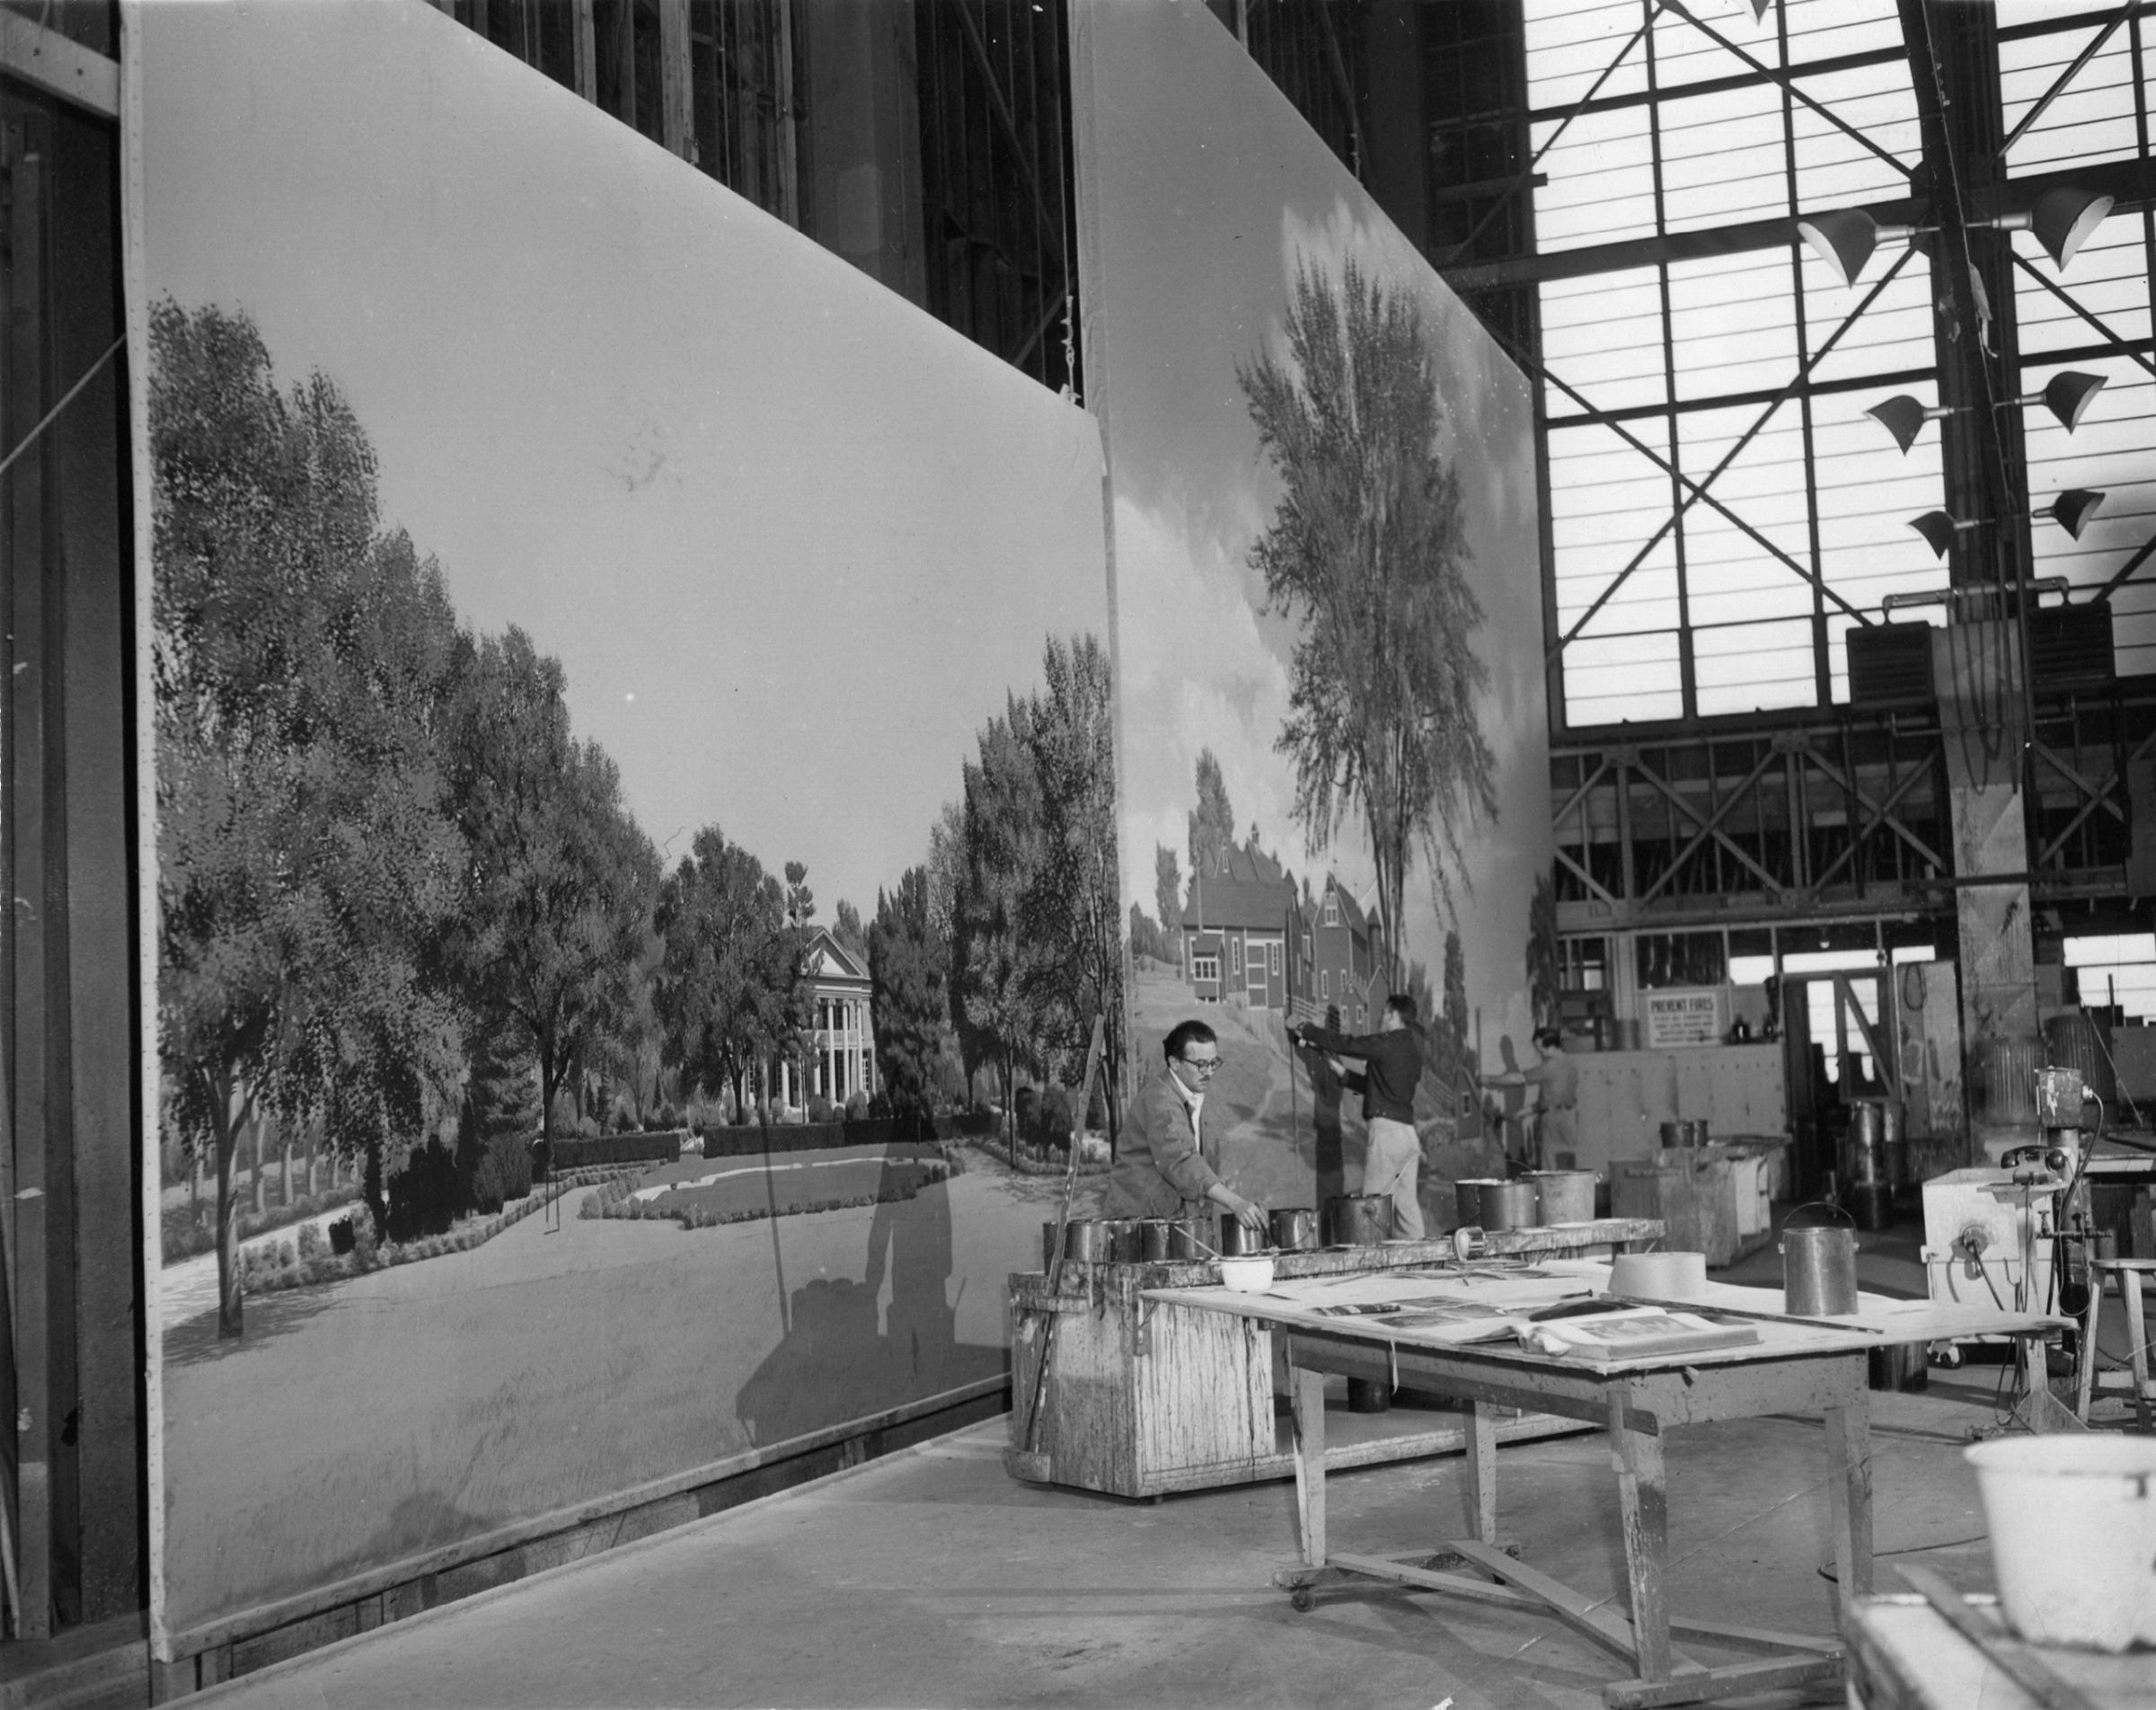 Clark Provins (left), John Harold Coakley (center), and an unknown scenic artist (right) painting at the MGM scenic art department c. 1950.